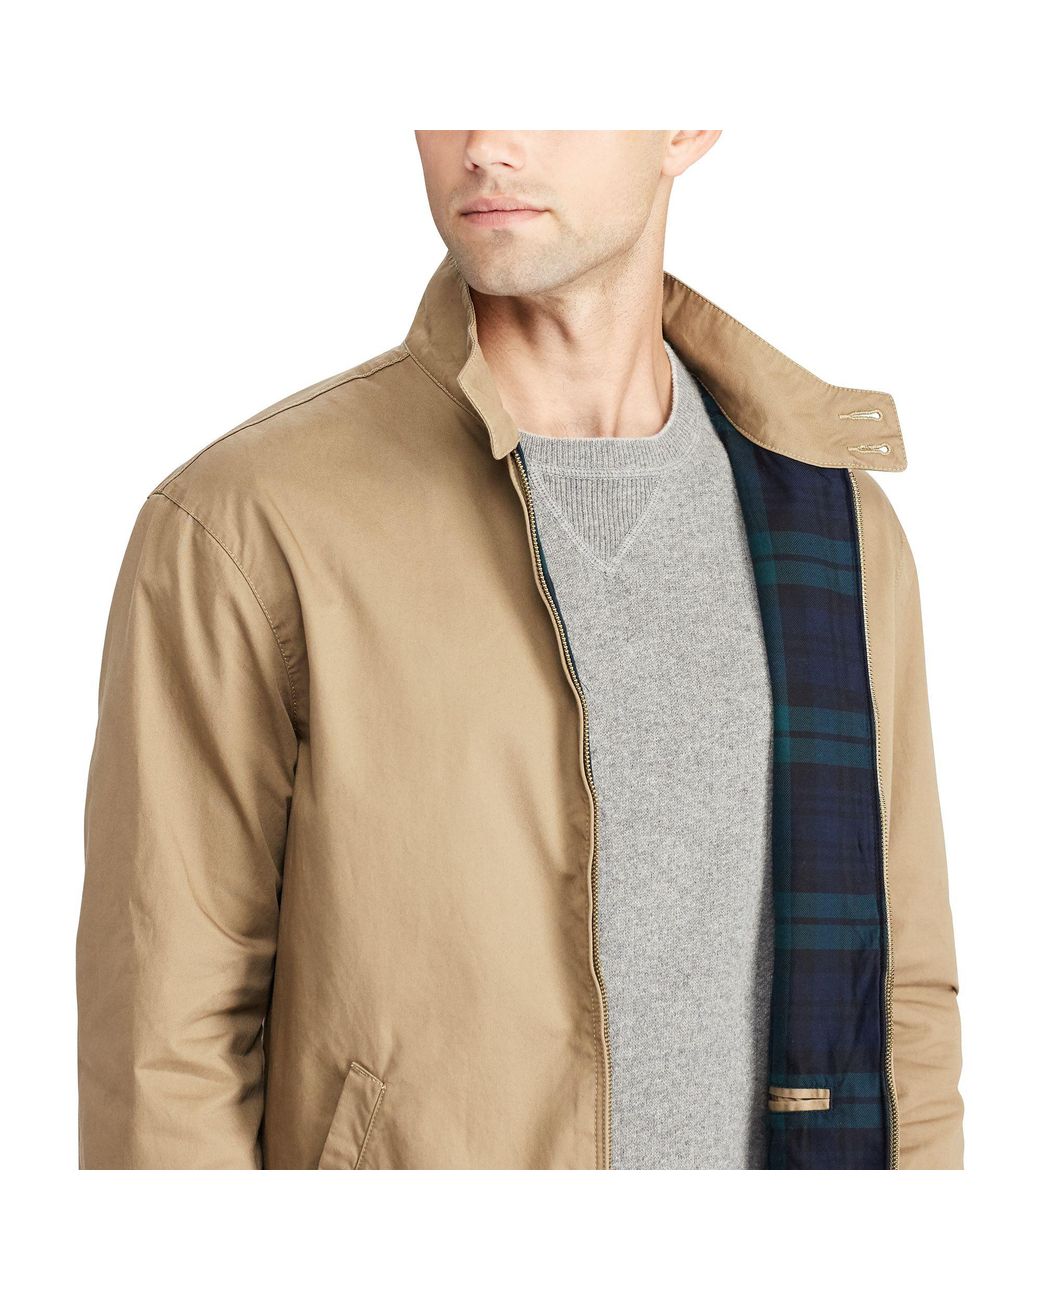 Polo Ralph Lauren Cotton Twill Jacket in Natural for Men | Lyst UK